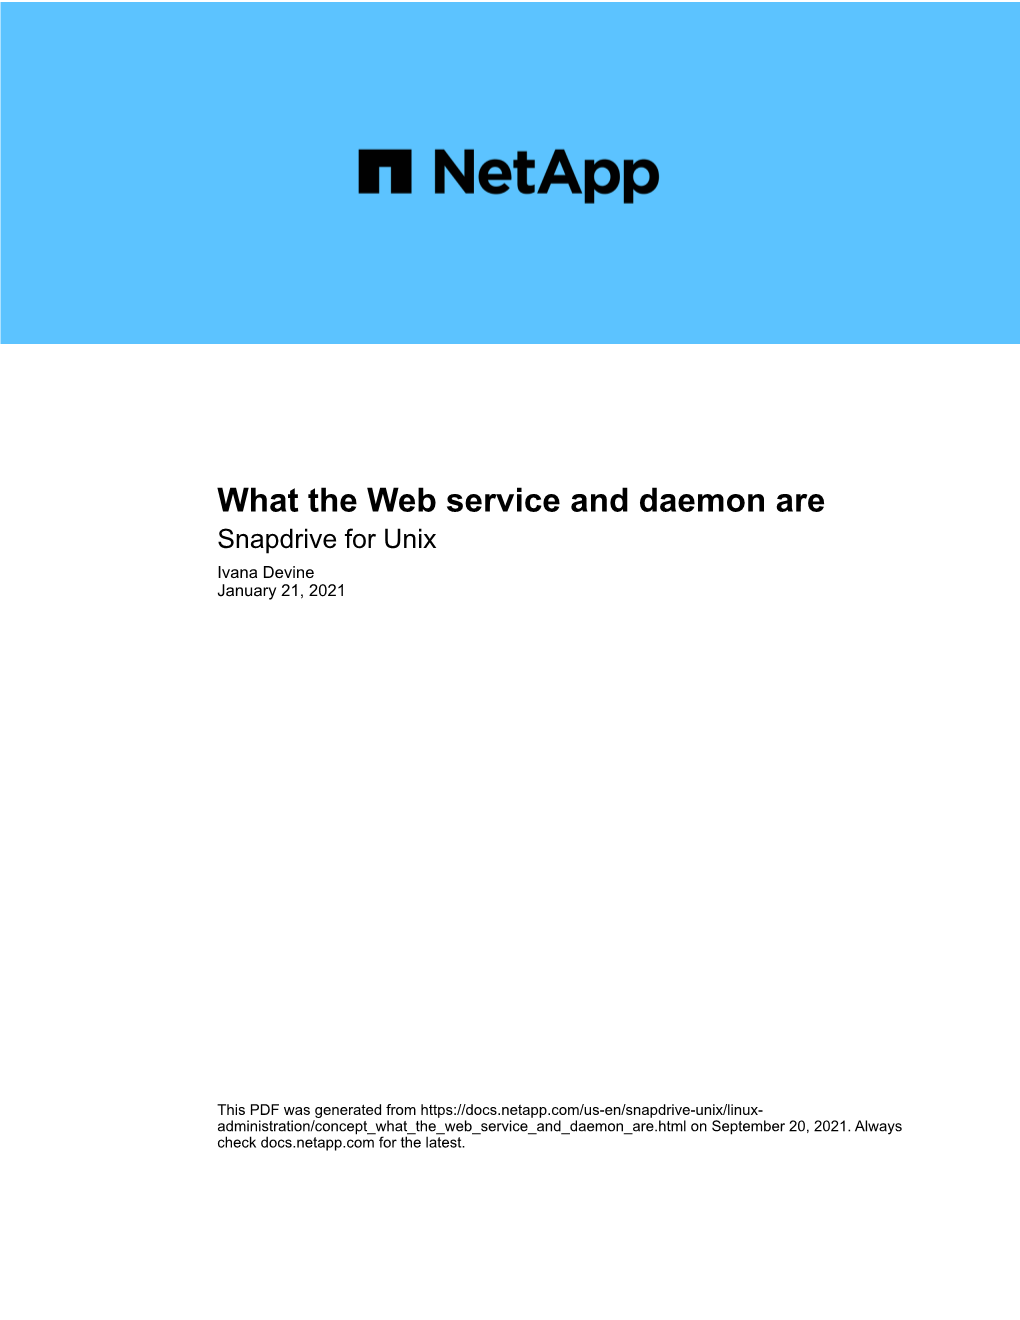 What the Web Service and Daemon Are : Snapdrive for Unix